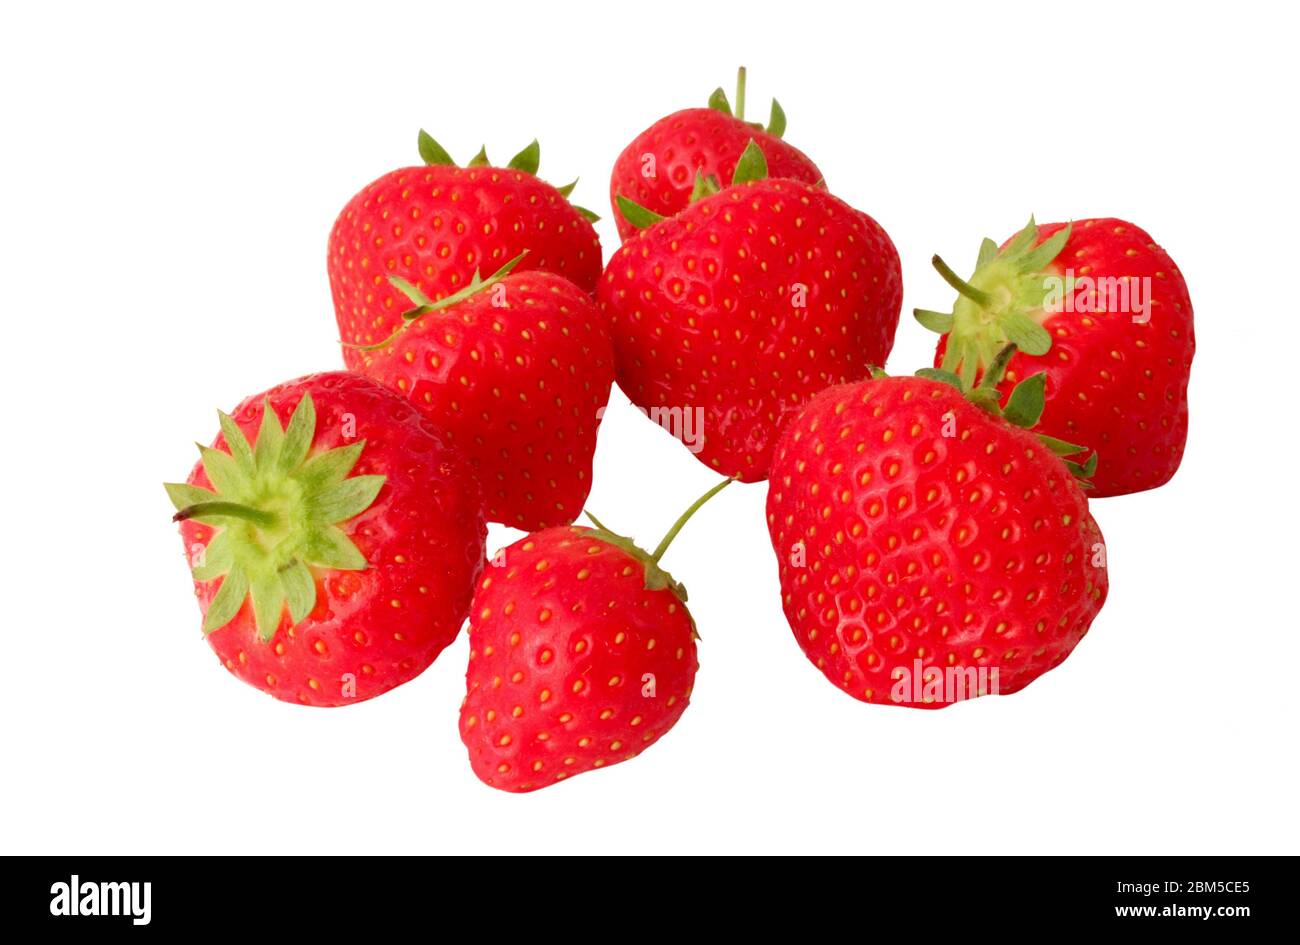 Sweet Strawberries isolated on a white background without shade. Germany Stock Photo